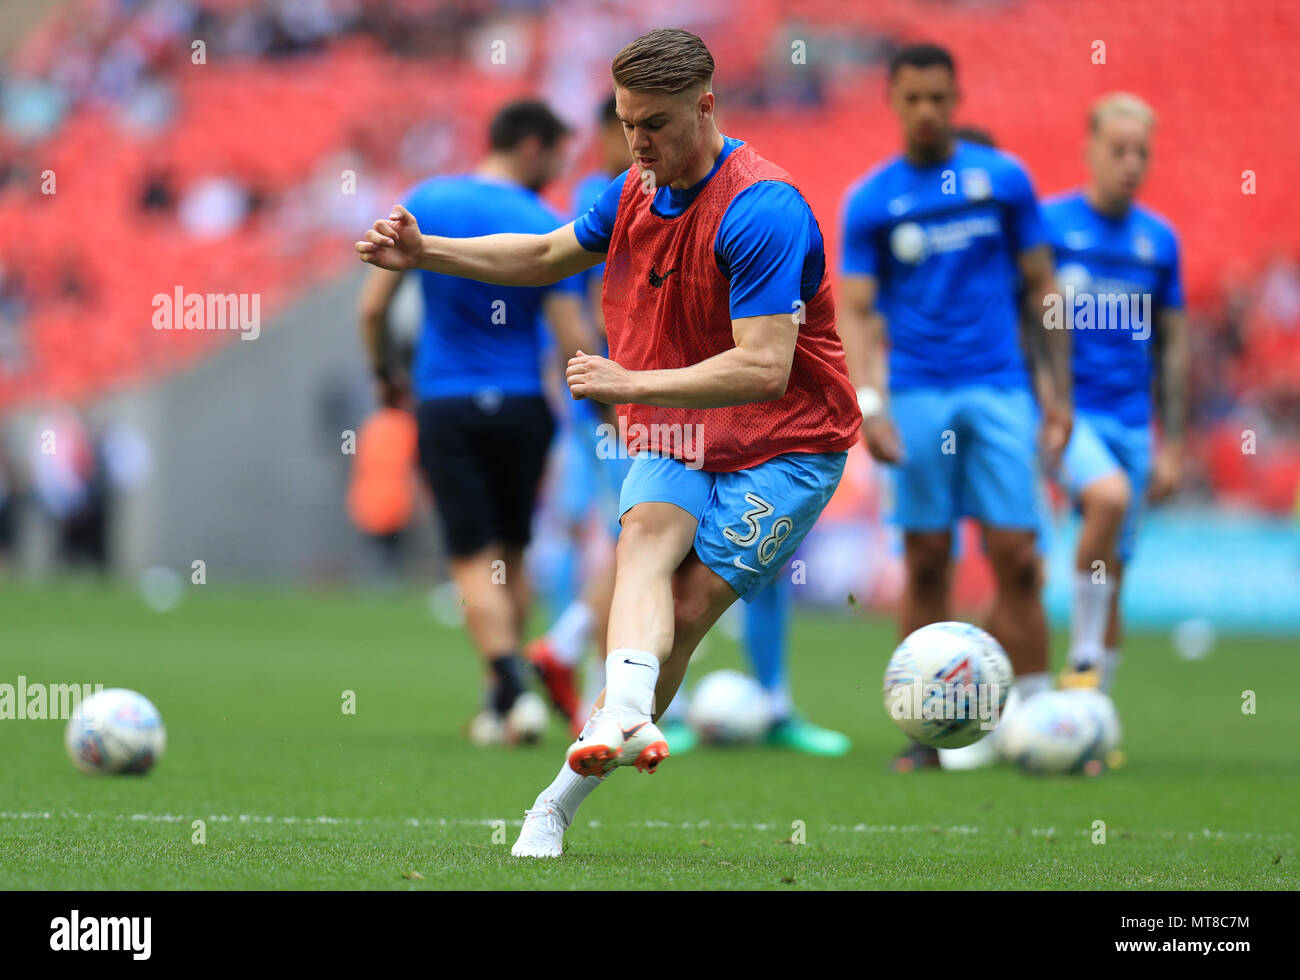 Coventry City's Jordan Ponticelli warms up prior to the Sky Bet League Two Final at Wembley Stadium, London. PRESS ASSOCIATION Photo. Picture date: Monday May 28, 2018. See PA story SOCCER League Two. Photo credit should read: Mike Egerton/PA Wire. RESTRICTIONS: No use with unauthorised audio, video, data, fixture lists, club/league logos or 'live' services. Online in-match use limited to 75 images, no video emulation. No use in betting, games or single club/league/player publications. Stock Photo